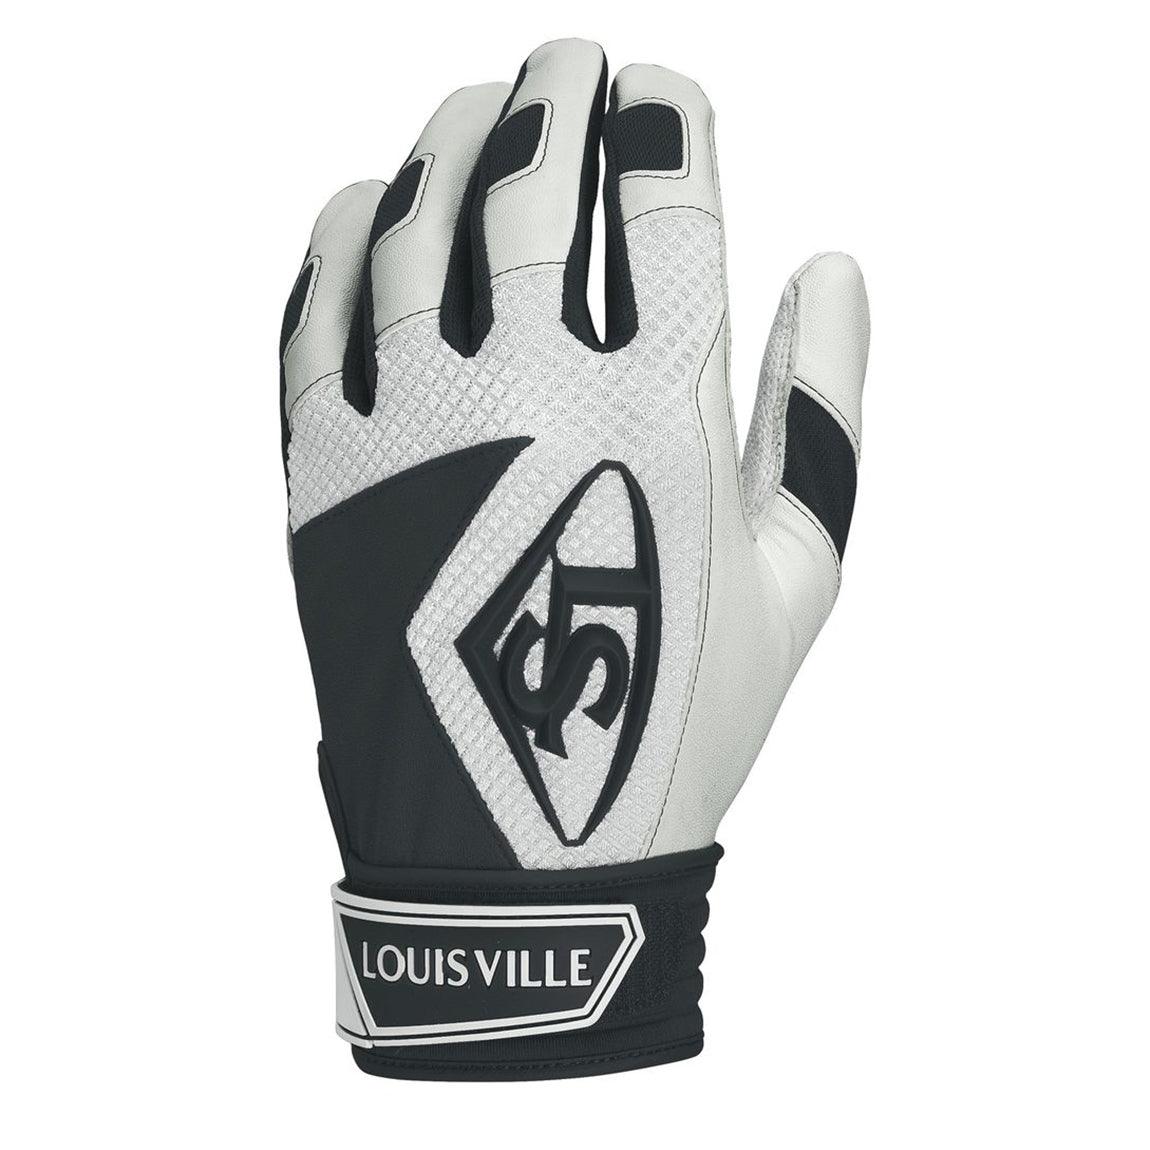 Series 7 Batting Glove - Sports Excellence